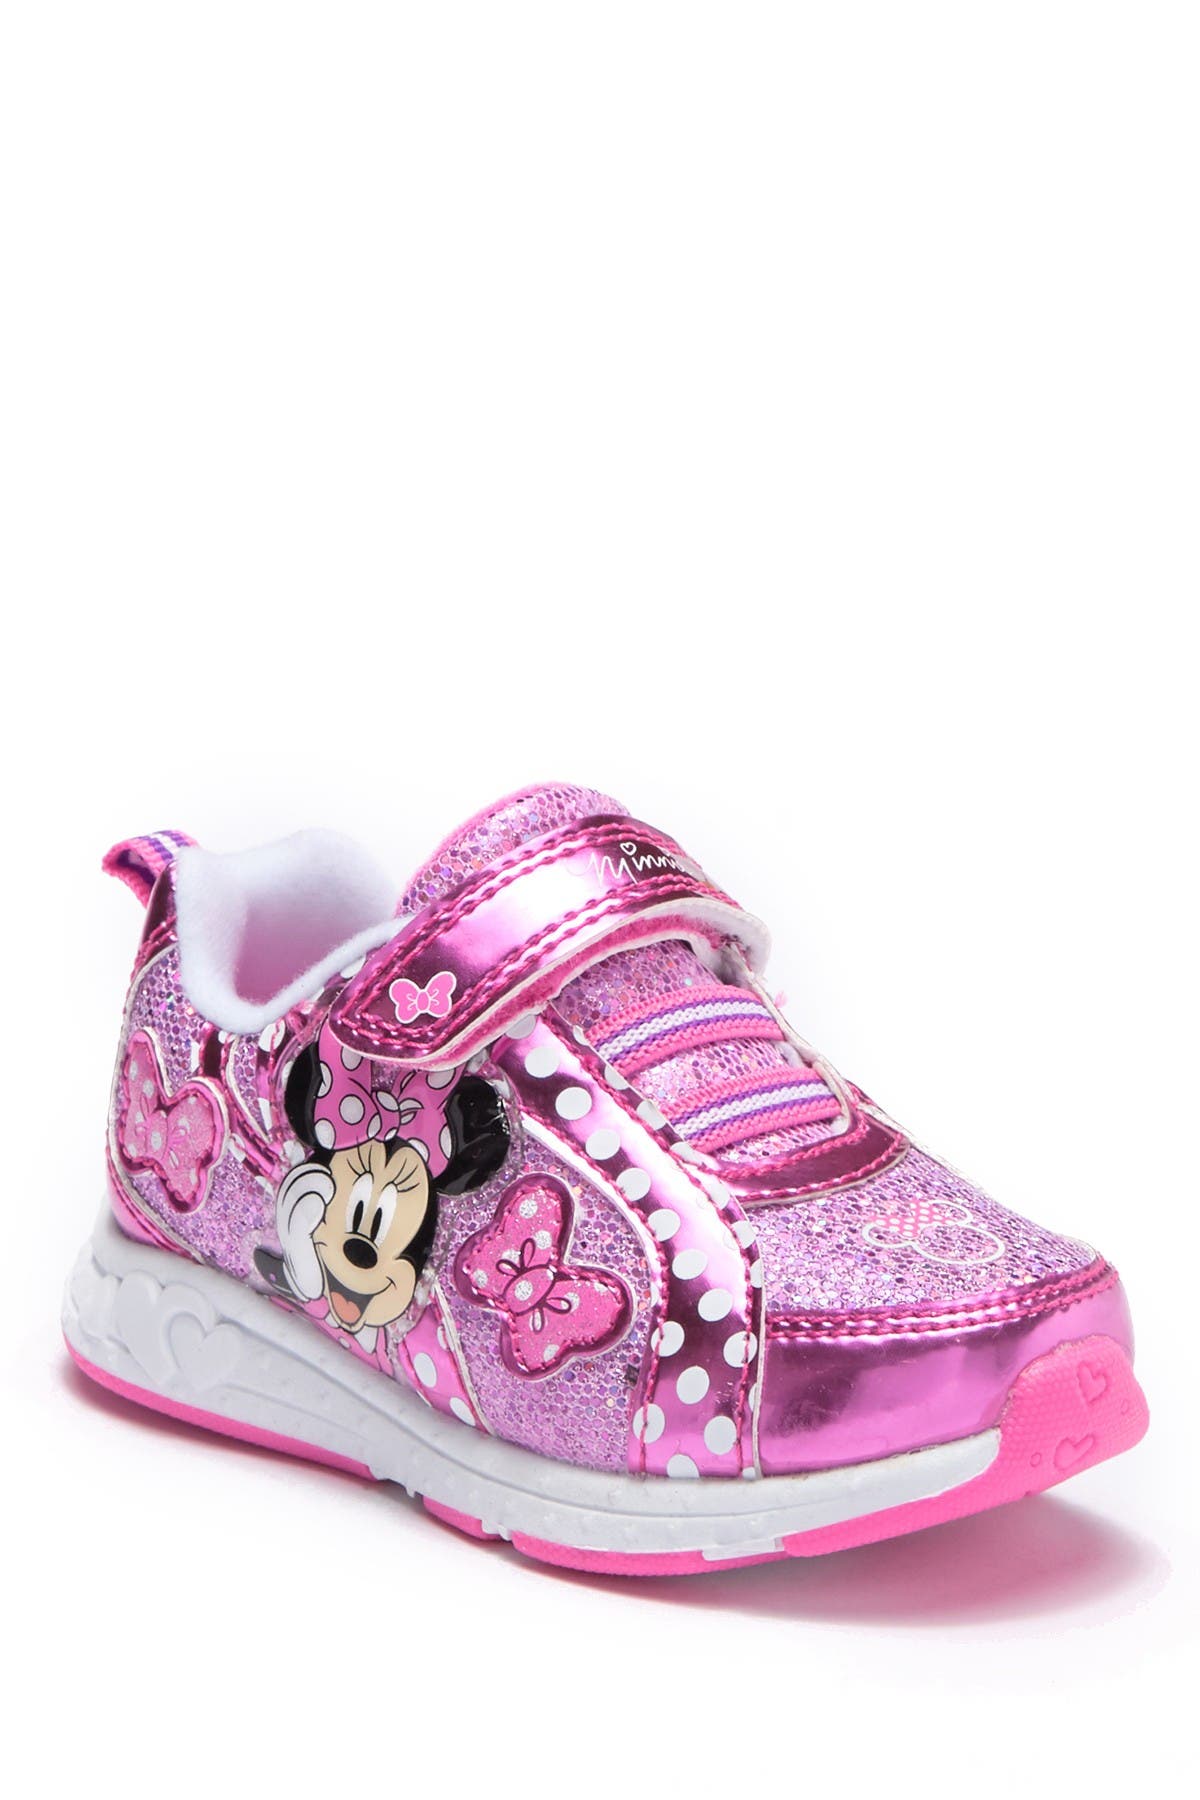 Josmo | Minnie Mouse Light-Up Sneaker 